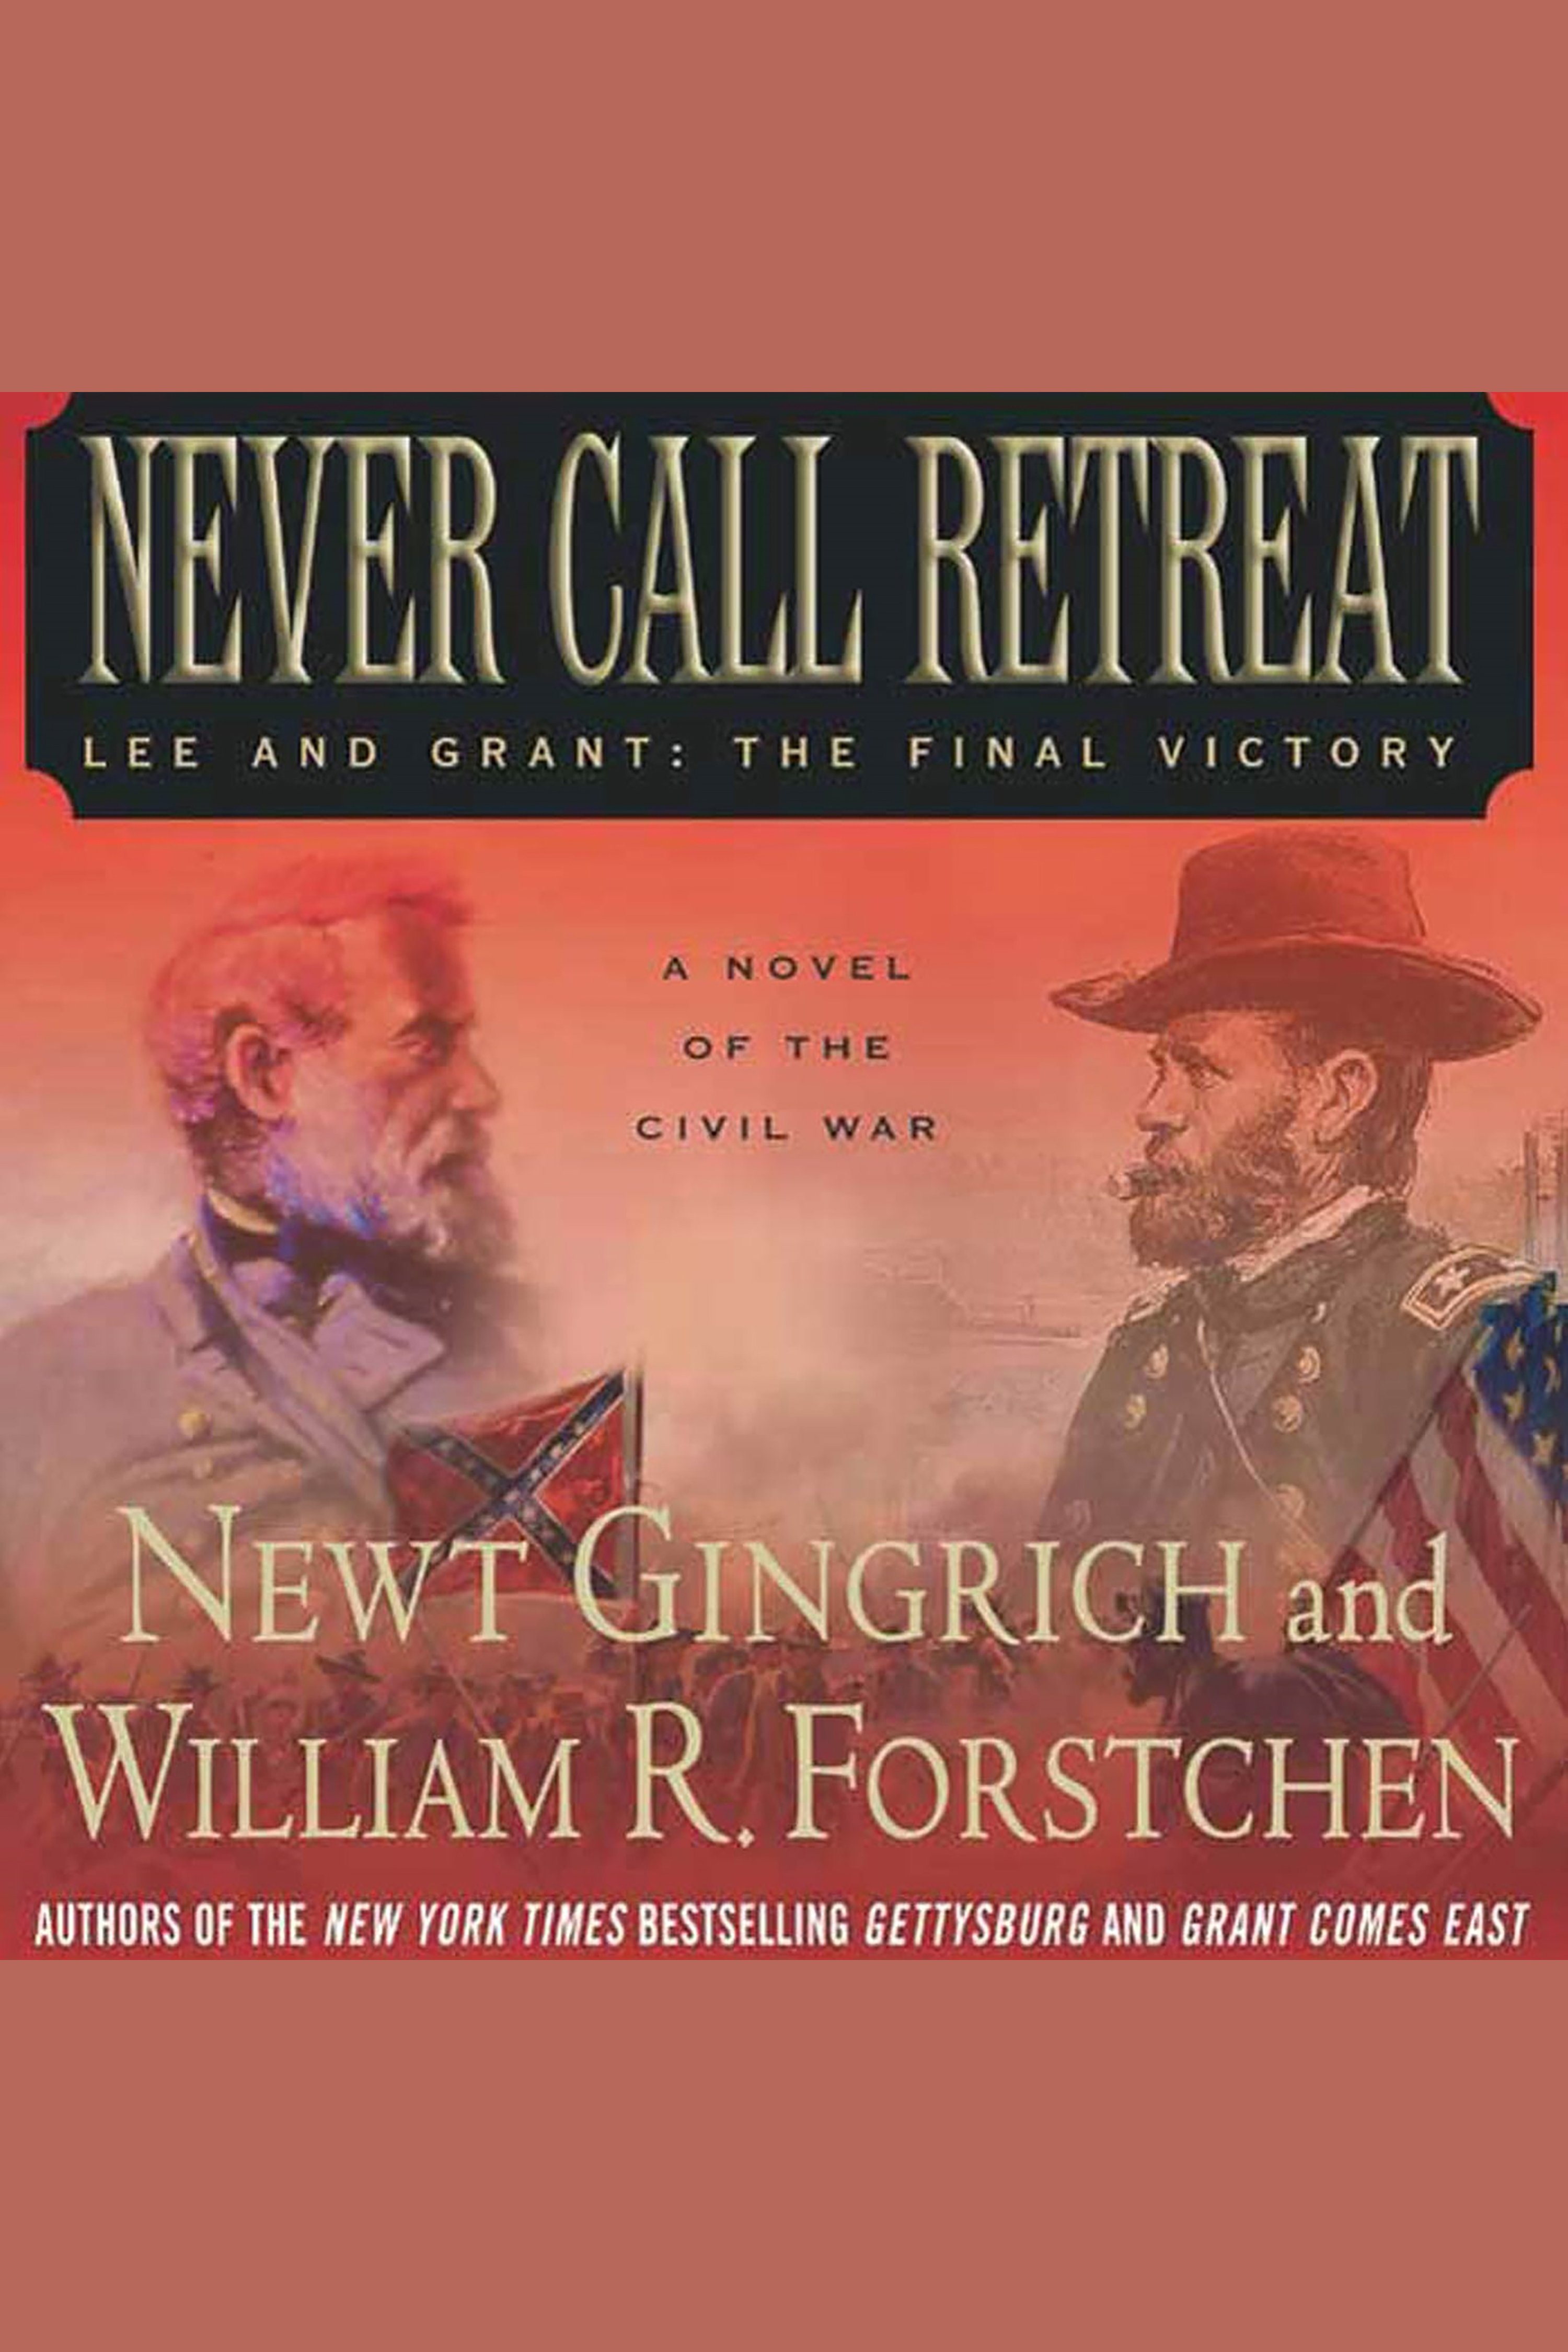 Image de couverture de Never Call Retreat [electronic resource] : Lee and Grant: the Final Victory